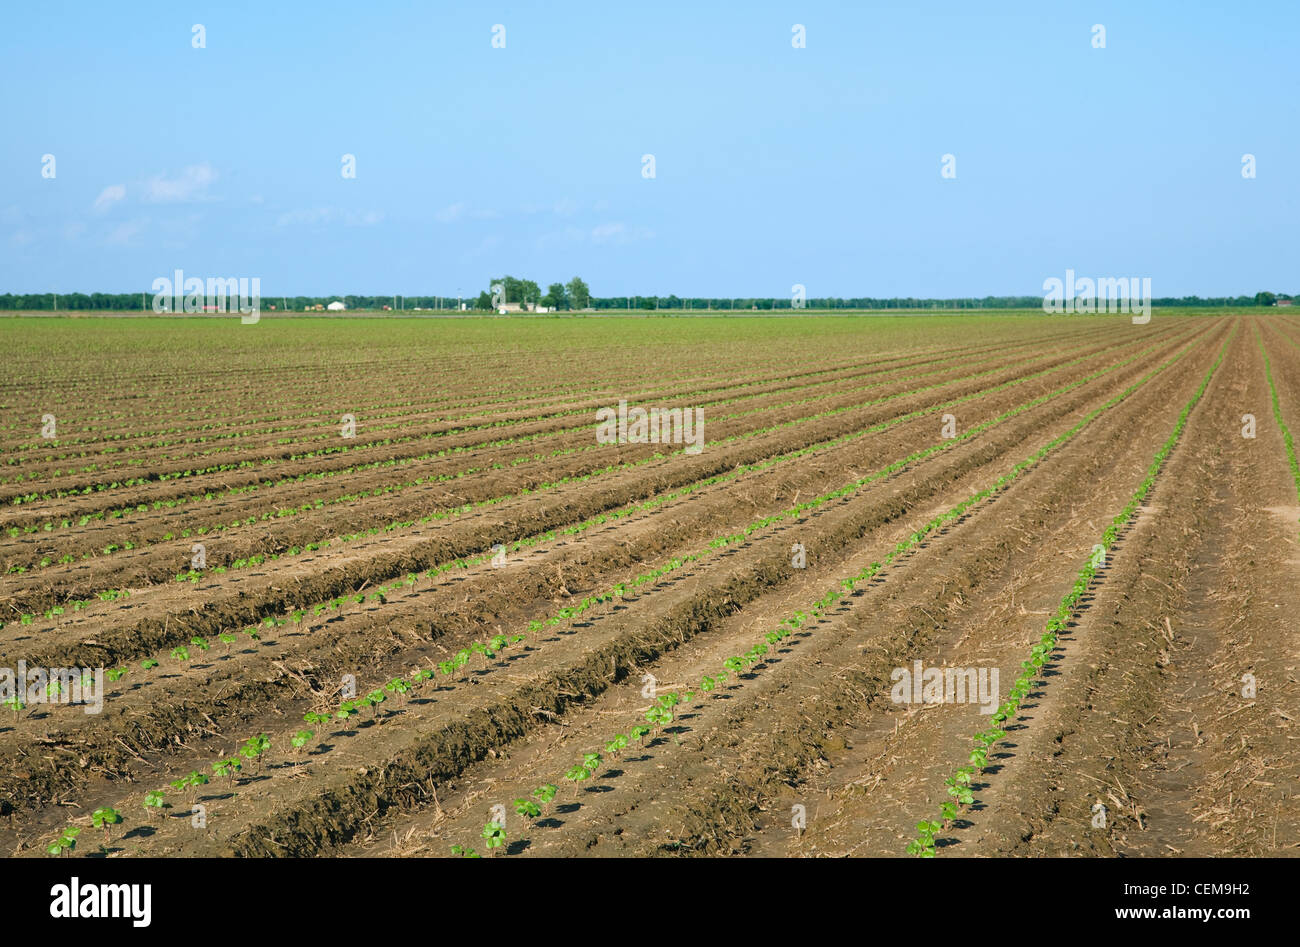 Agriculture - Rows of cotton seedlings growing in a conventionally tilled field / Arkansas, USA. Stock Photo